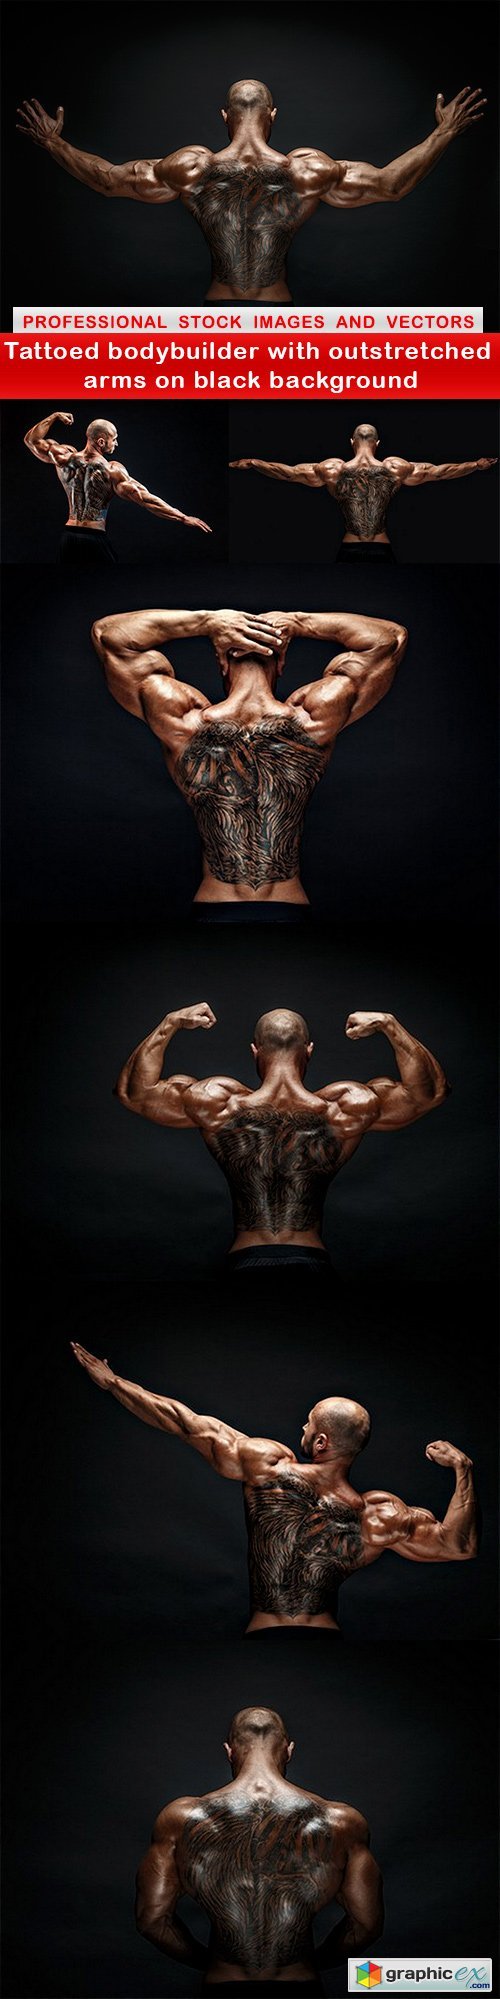 Tattoed bodybuilder with outstretched arms on black background - 7 UHQ JPEG